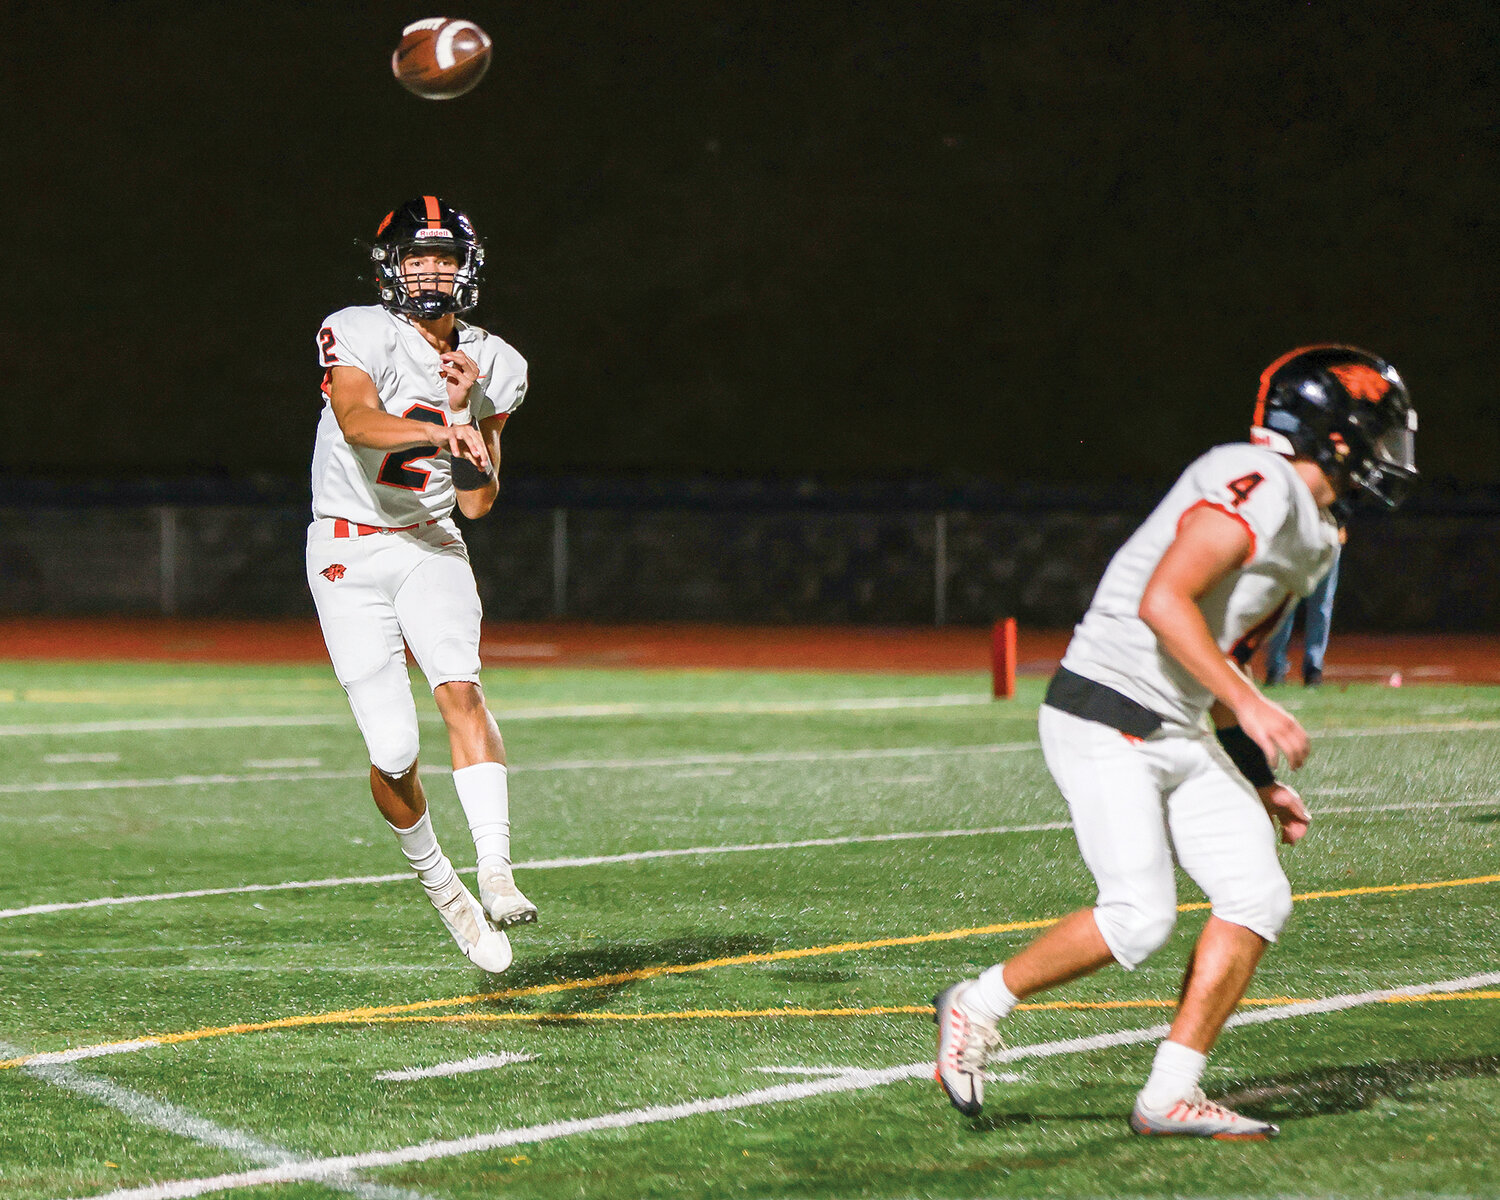 Battle Ground quarterback Ethan Adams throws a pass during the Tigers’ 48-30 league win over Union High School on Thursday, Oct. 12.